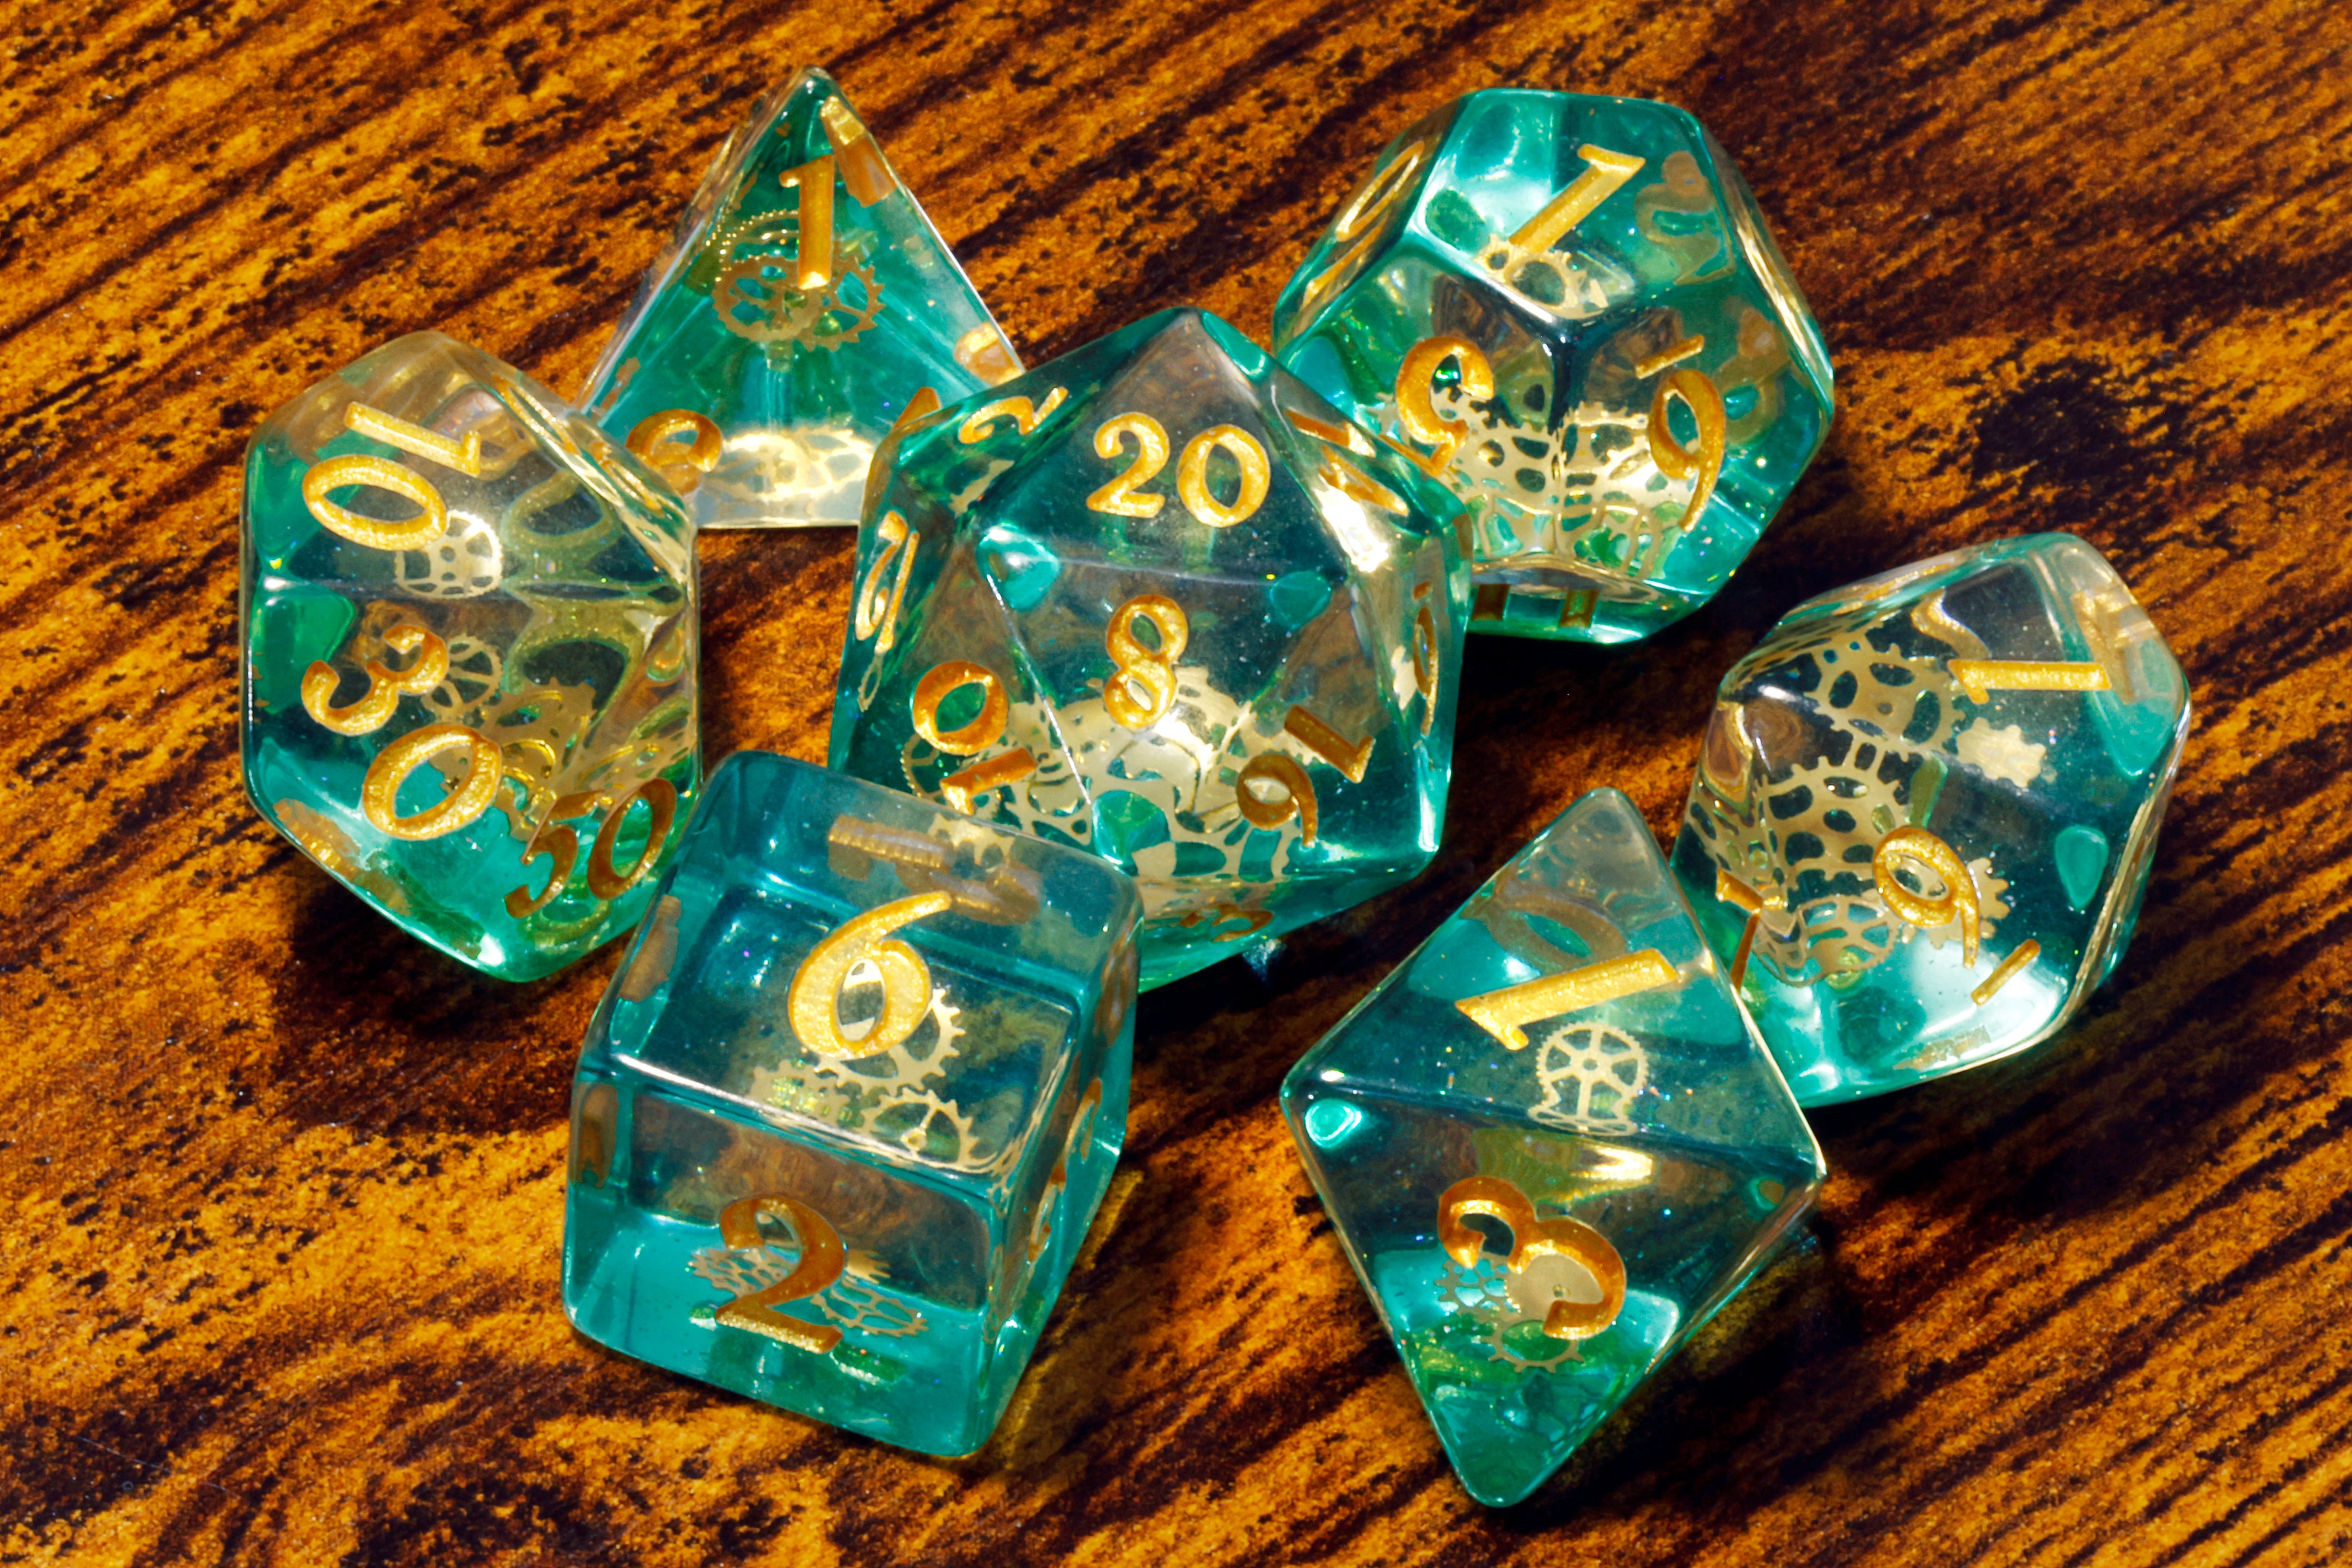 a close up of a number of dices on a table